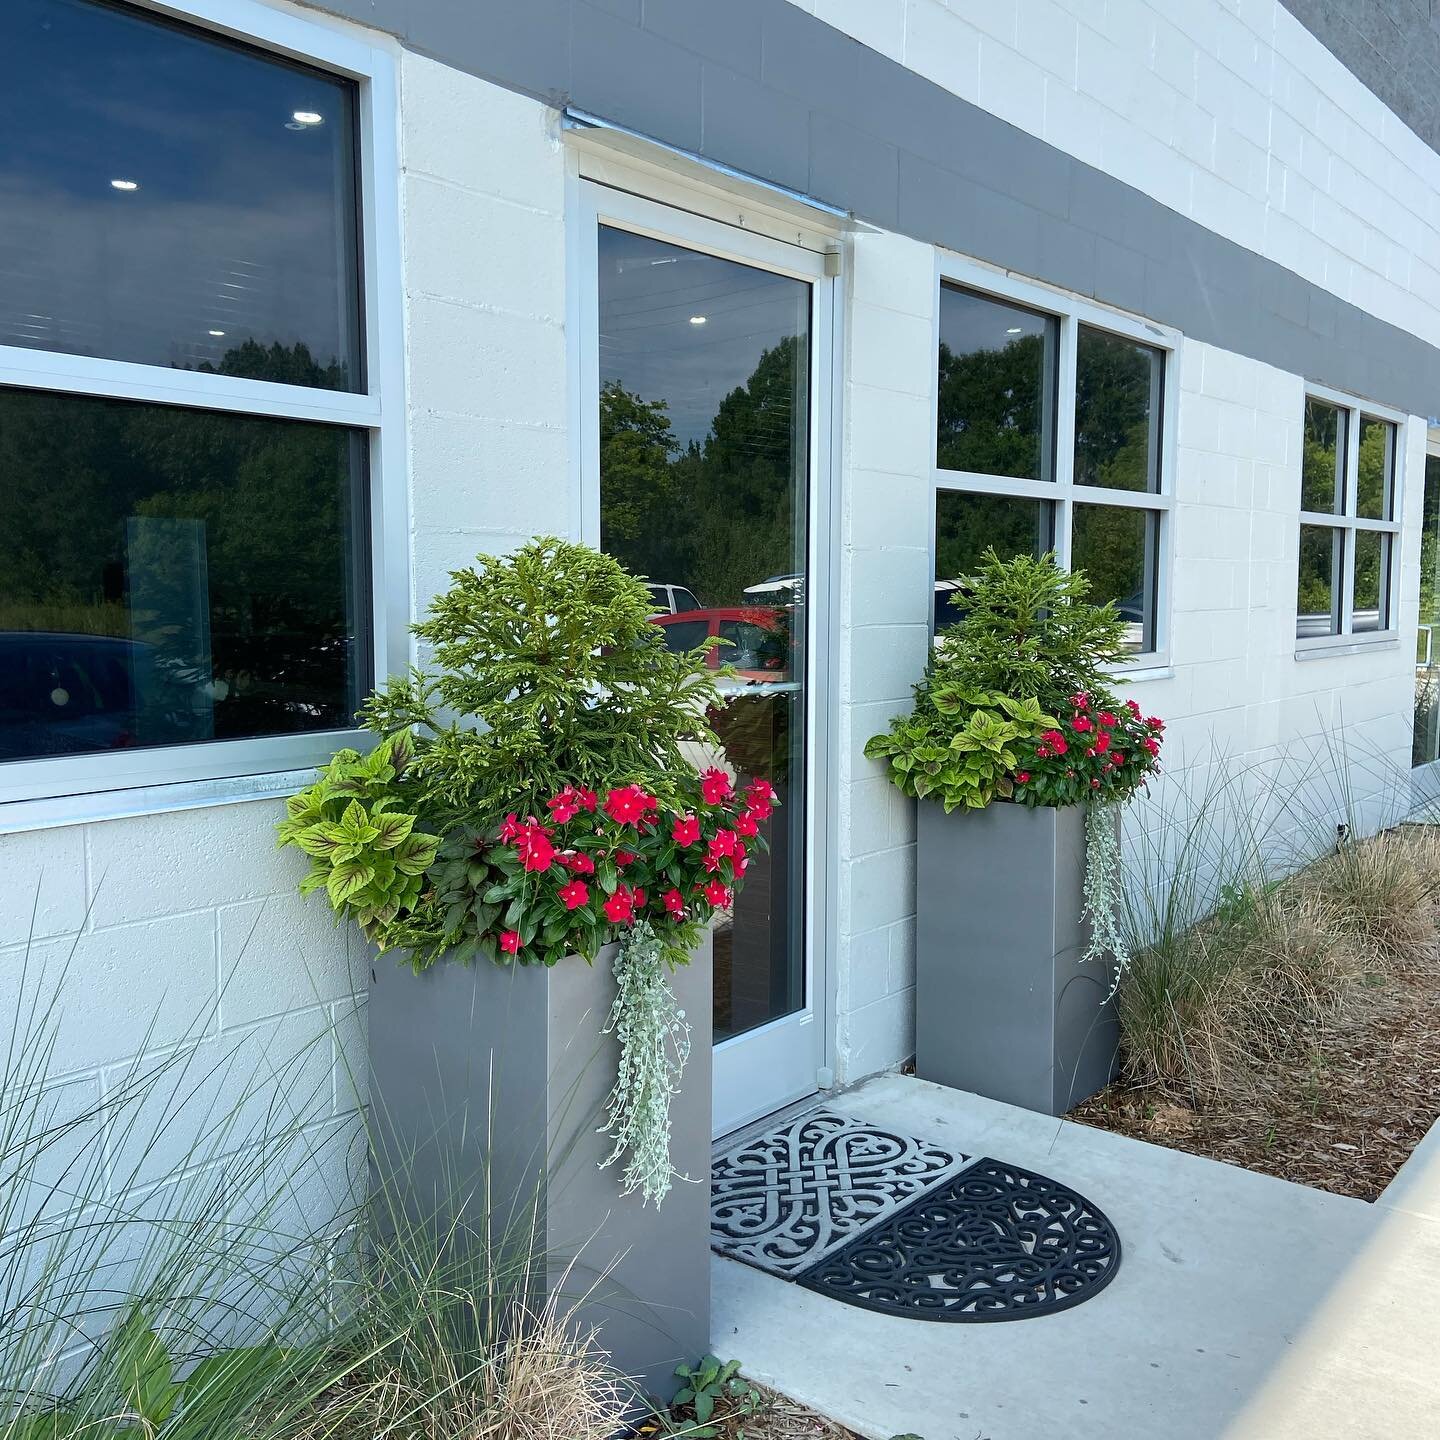 A cheery entrance to this office. 

#containergardening
#containergardens
#entrancecontainers